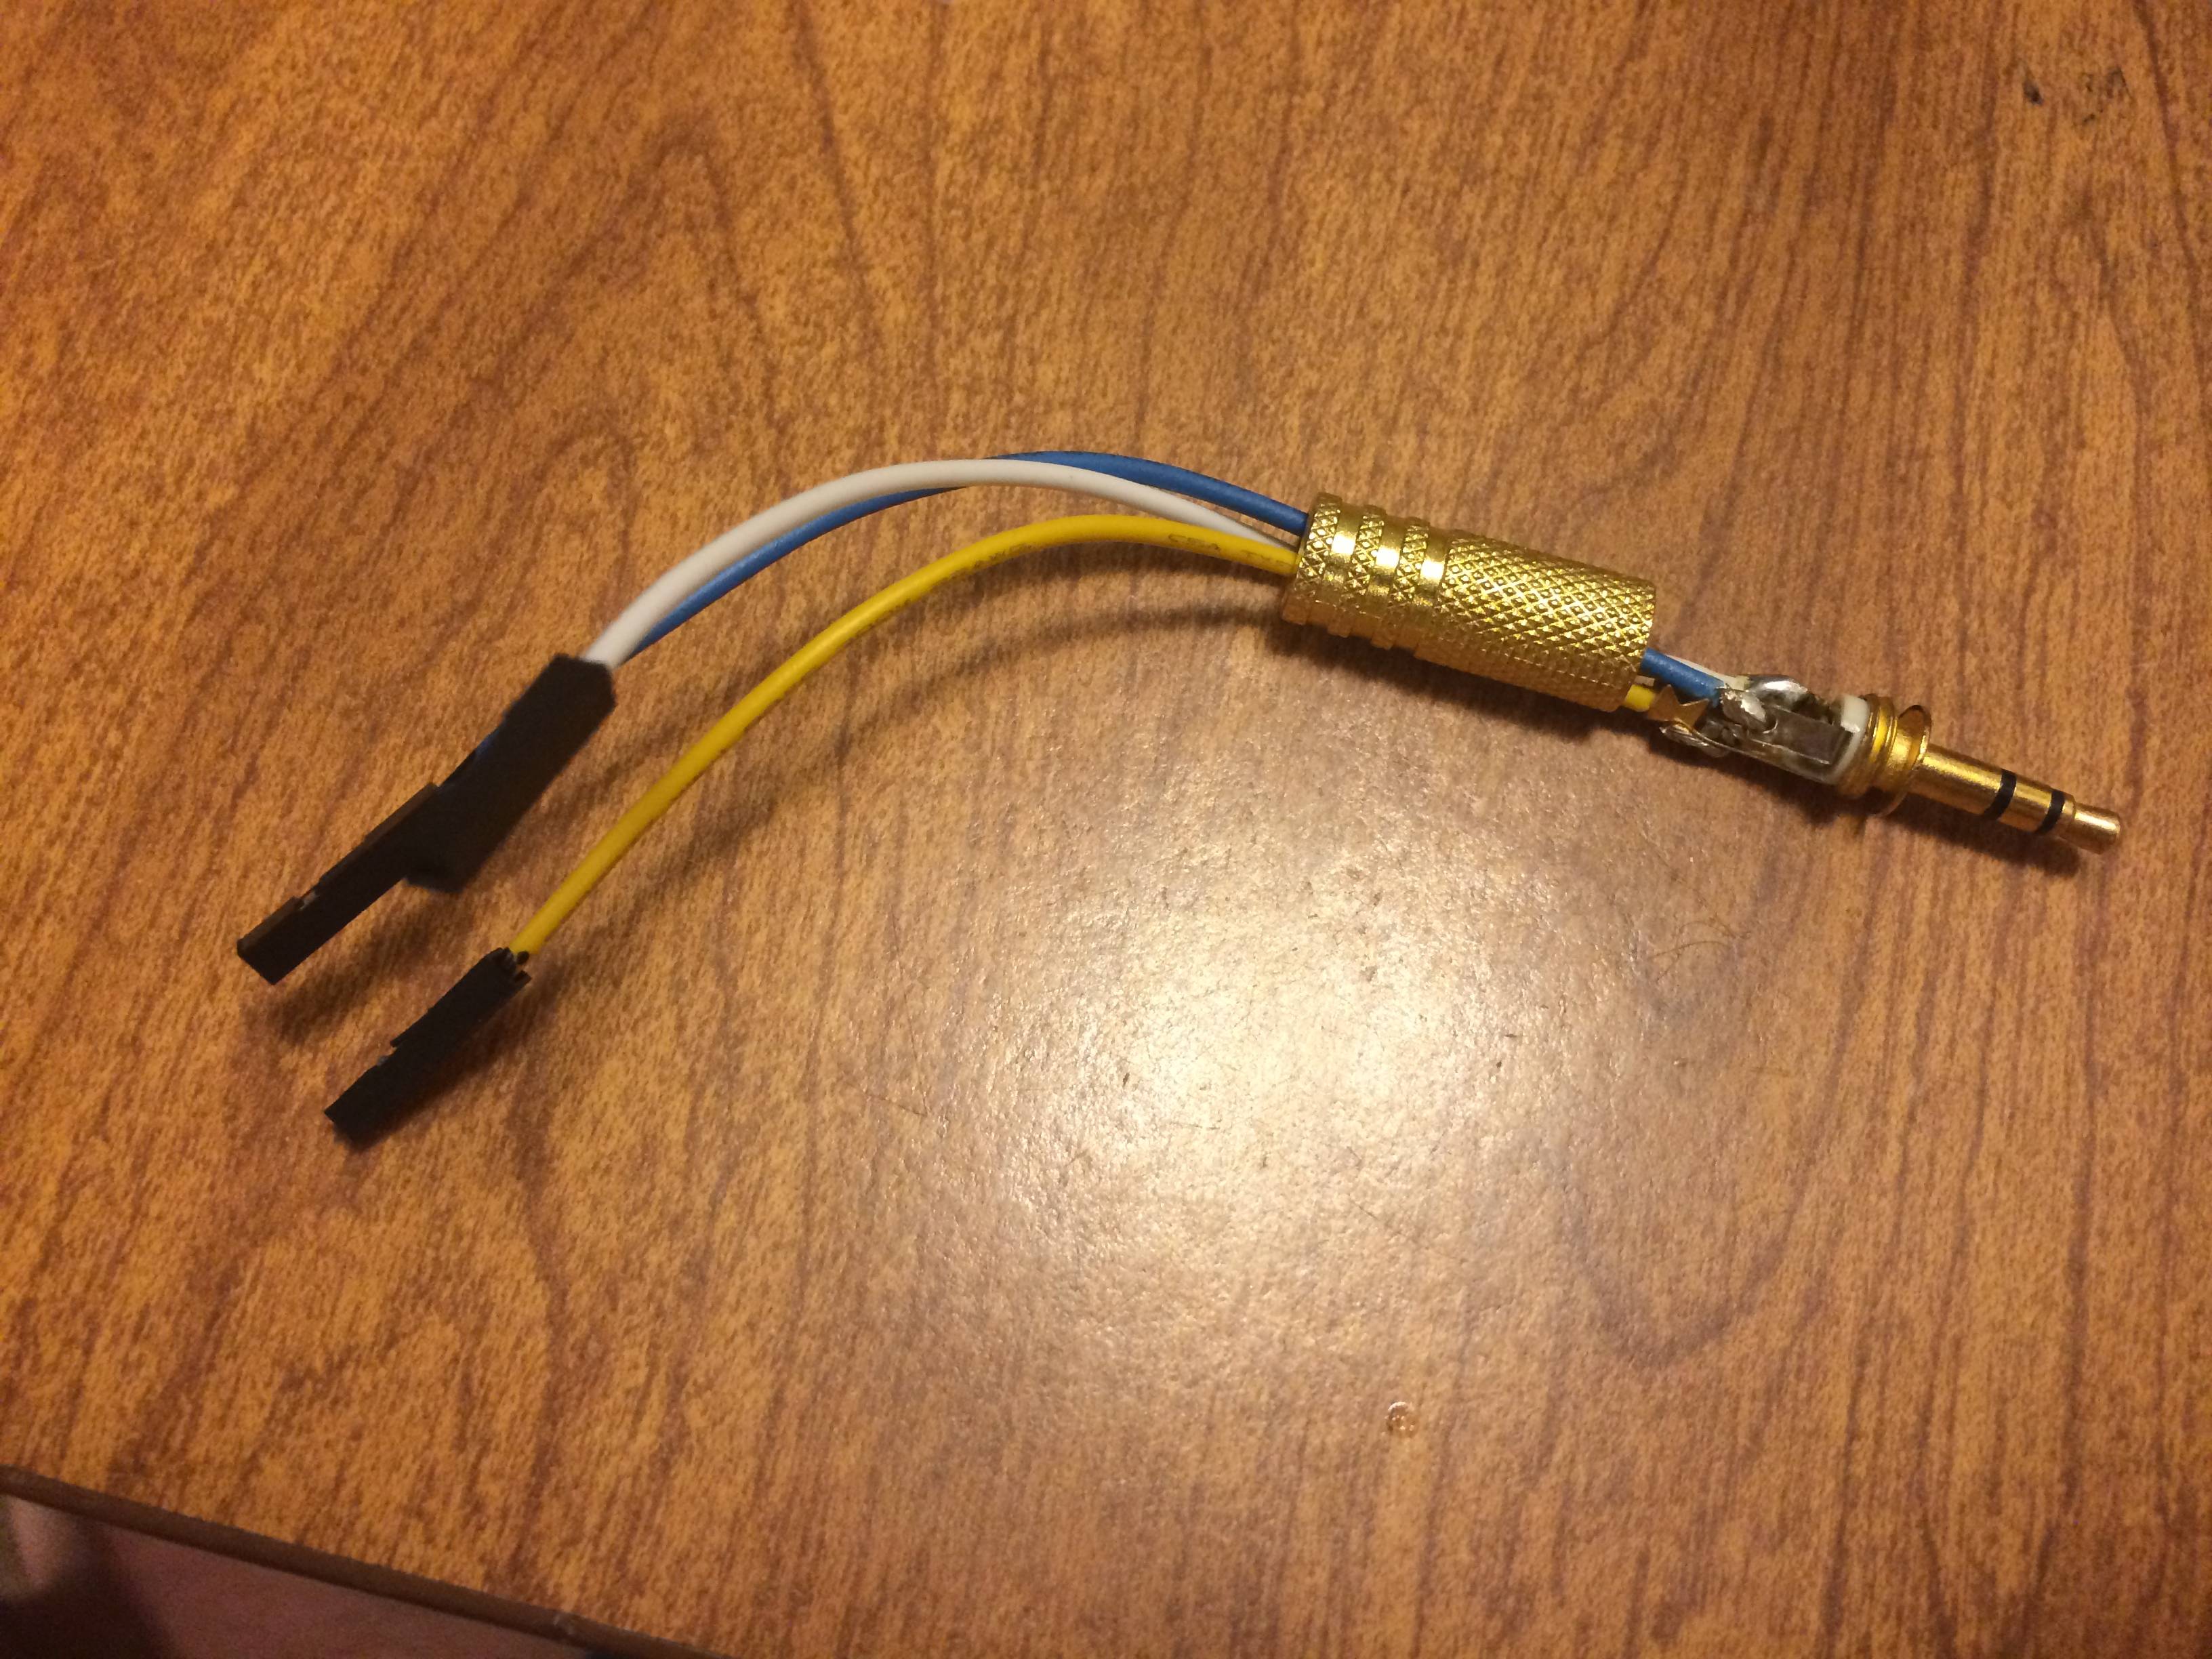 The cutest little audio cable you ever did see! Left it open so you could see how I soldered this. Also ended up fixing an old pair of headphones once I realized you can replace the 3.5mm part.